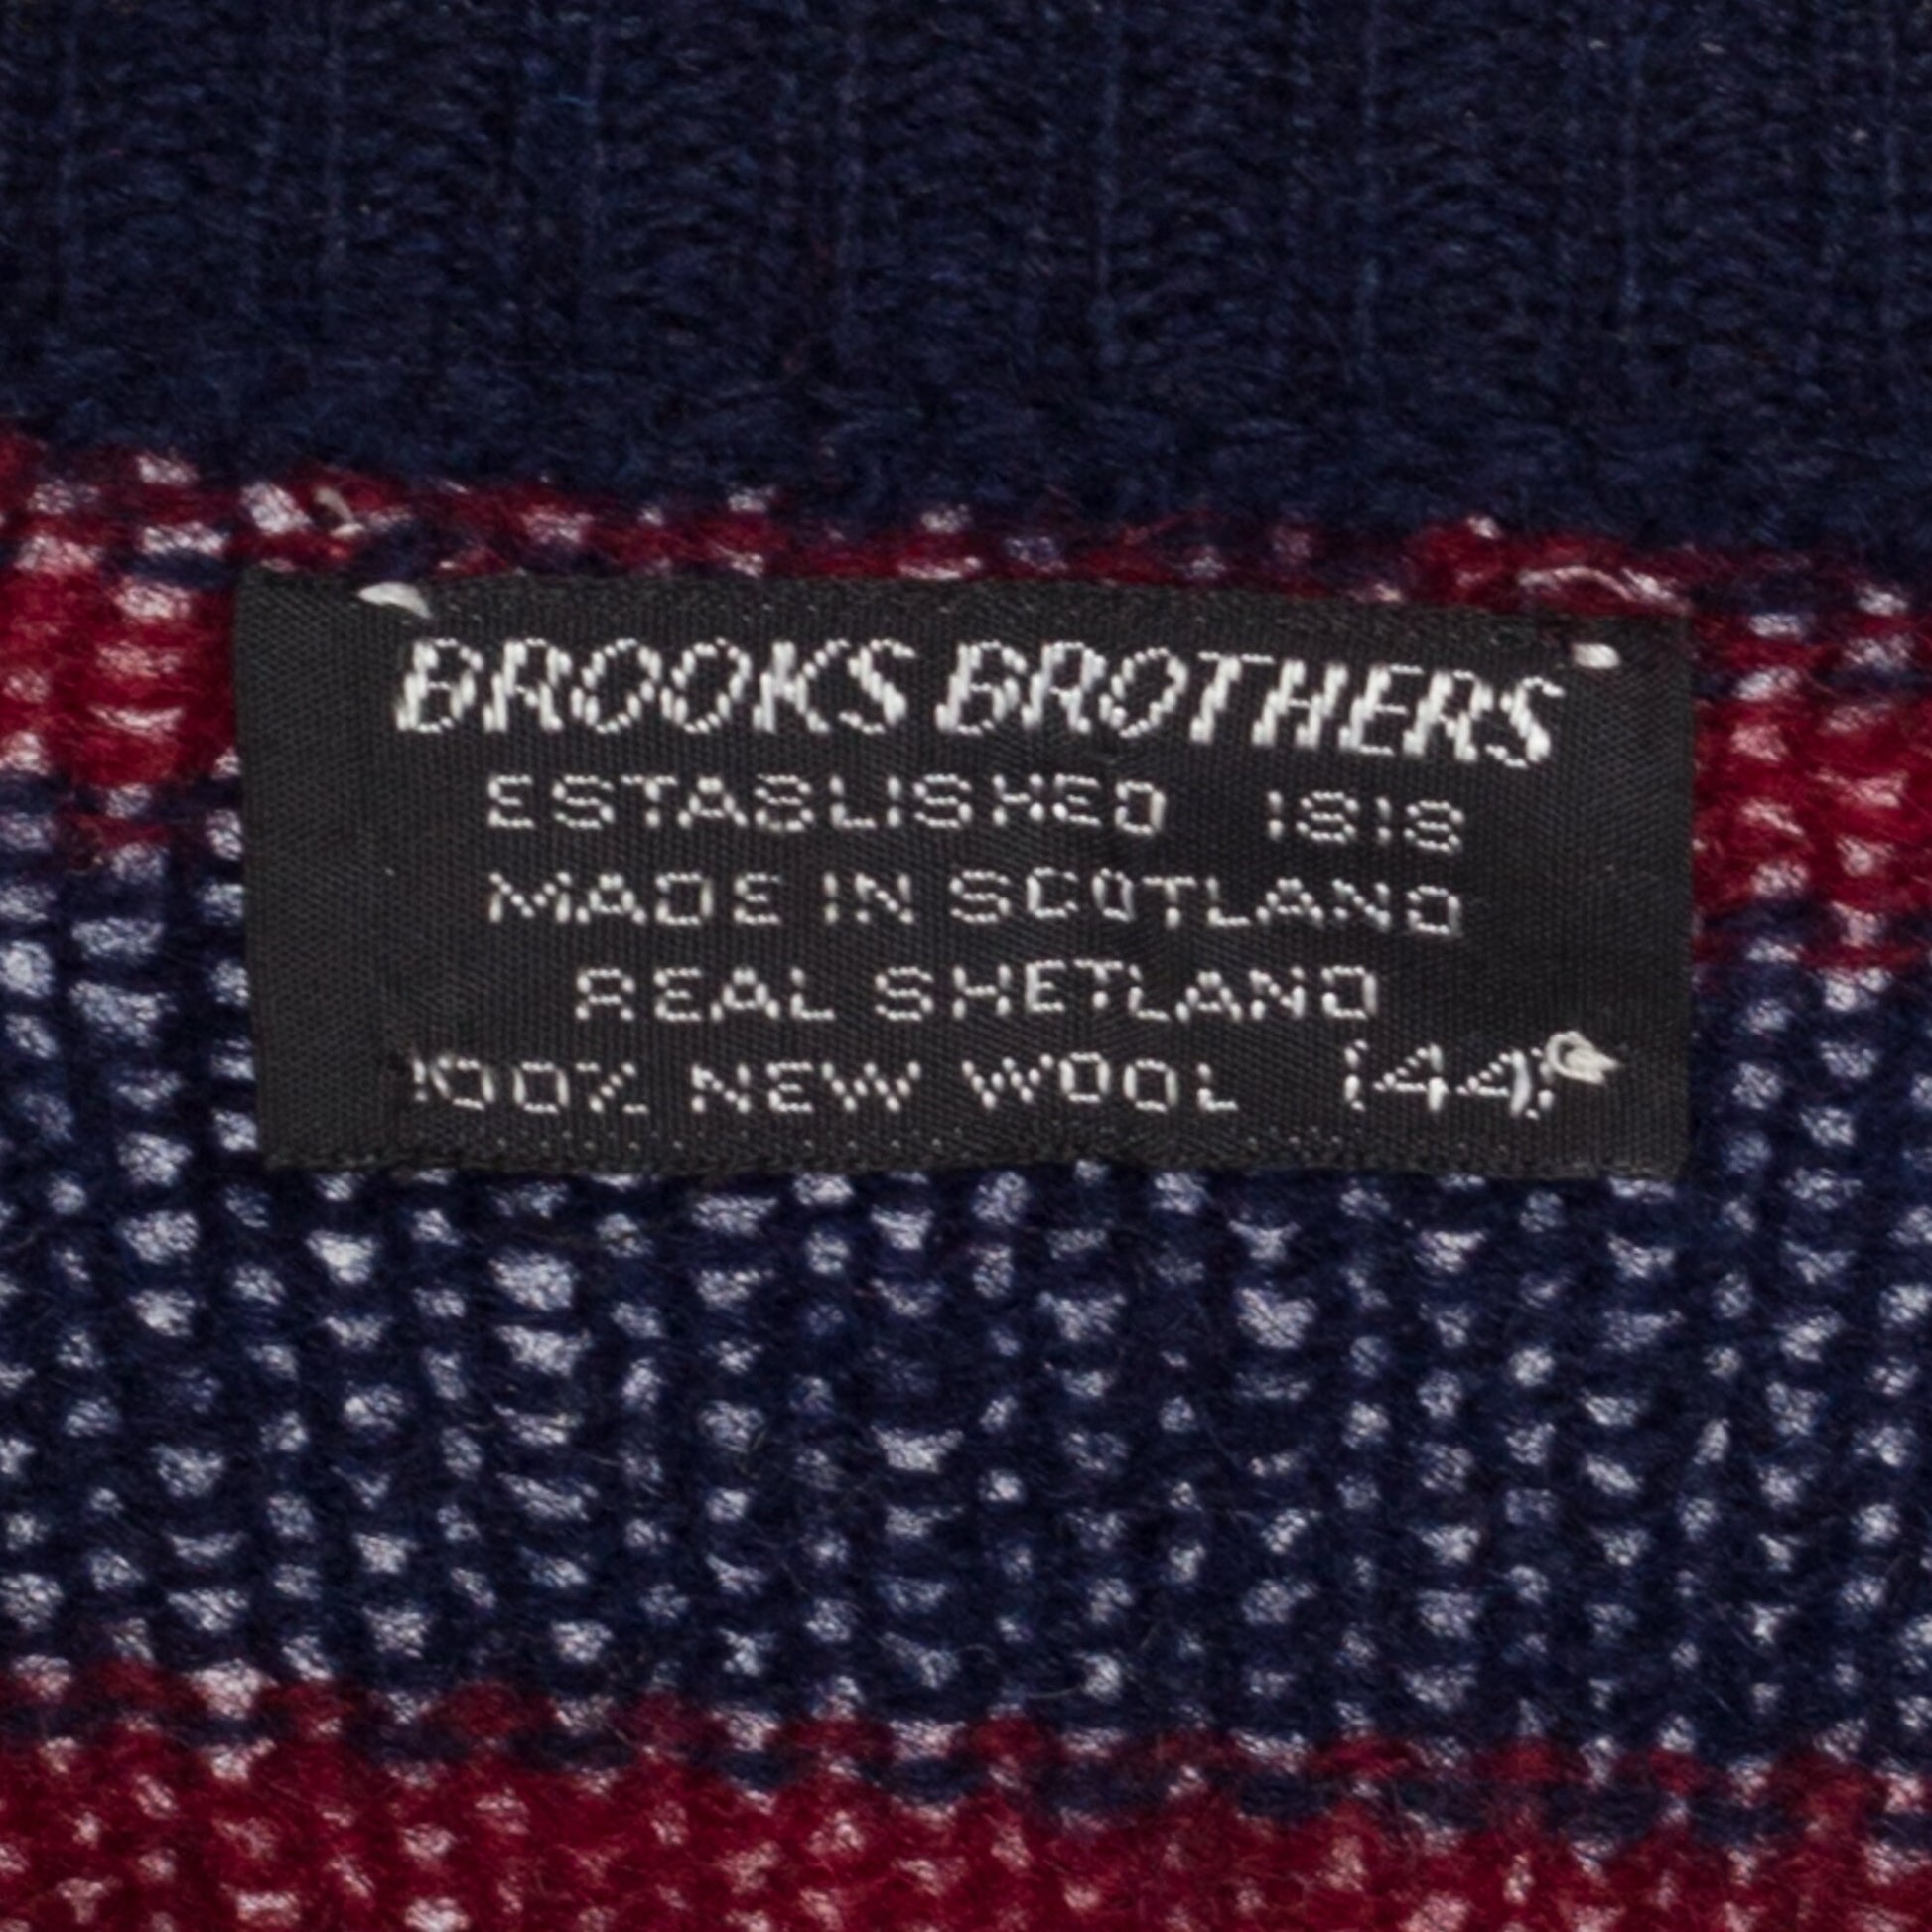 Medium 80s Brooks Brothers Striped Shetland Wool Sweater | Vintage Navy Blue & Red Made In Scotland Knit Pullover Jumper